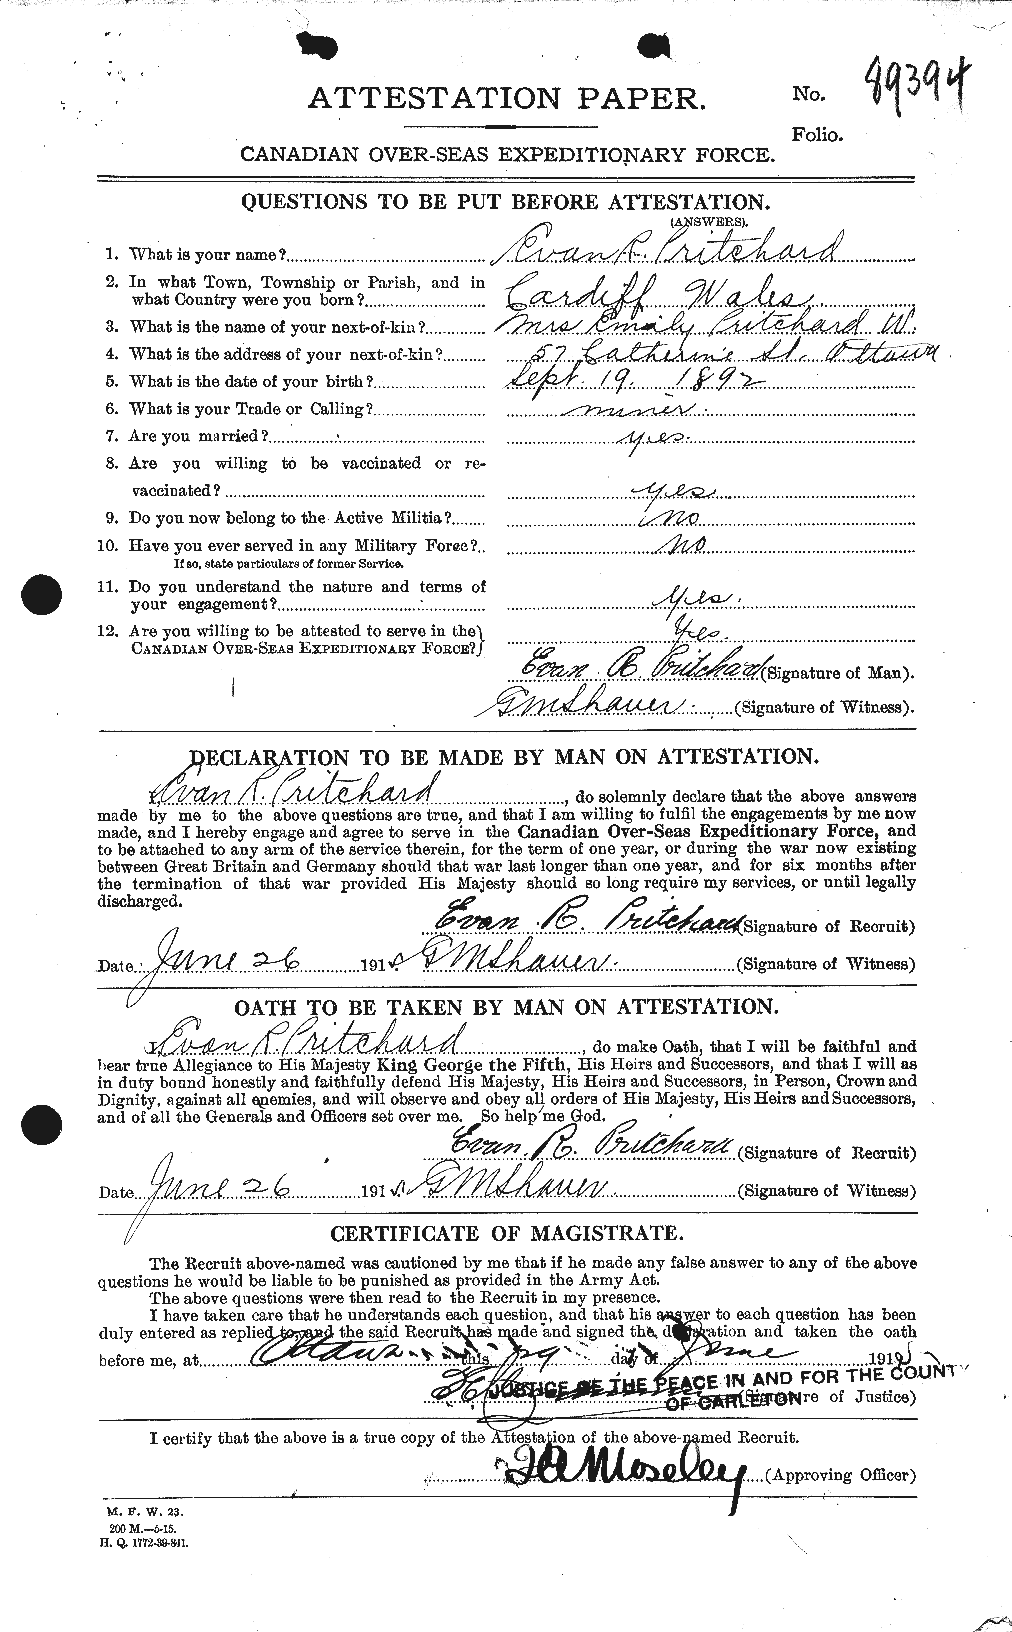 Personnel Records of the First World War - CEF 588515a